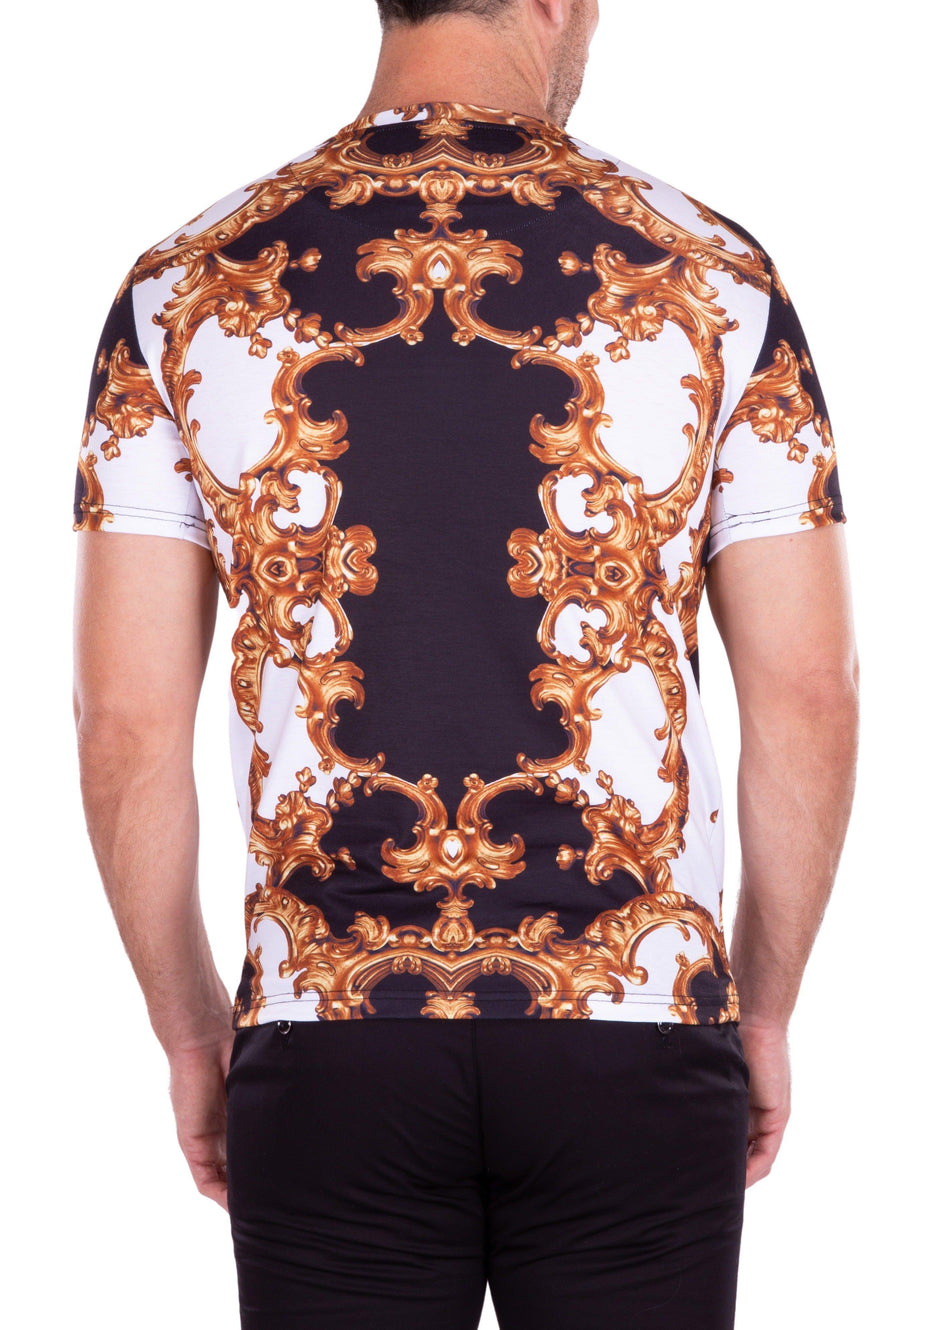 Antique Flourish Abstract Bold Printed All-Over Graphic Tee Black